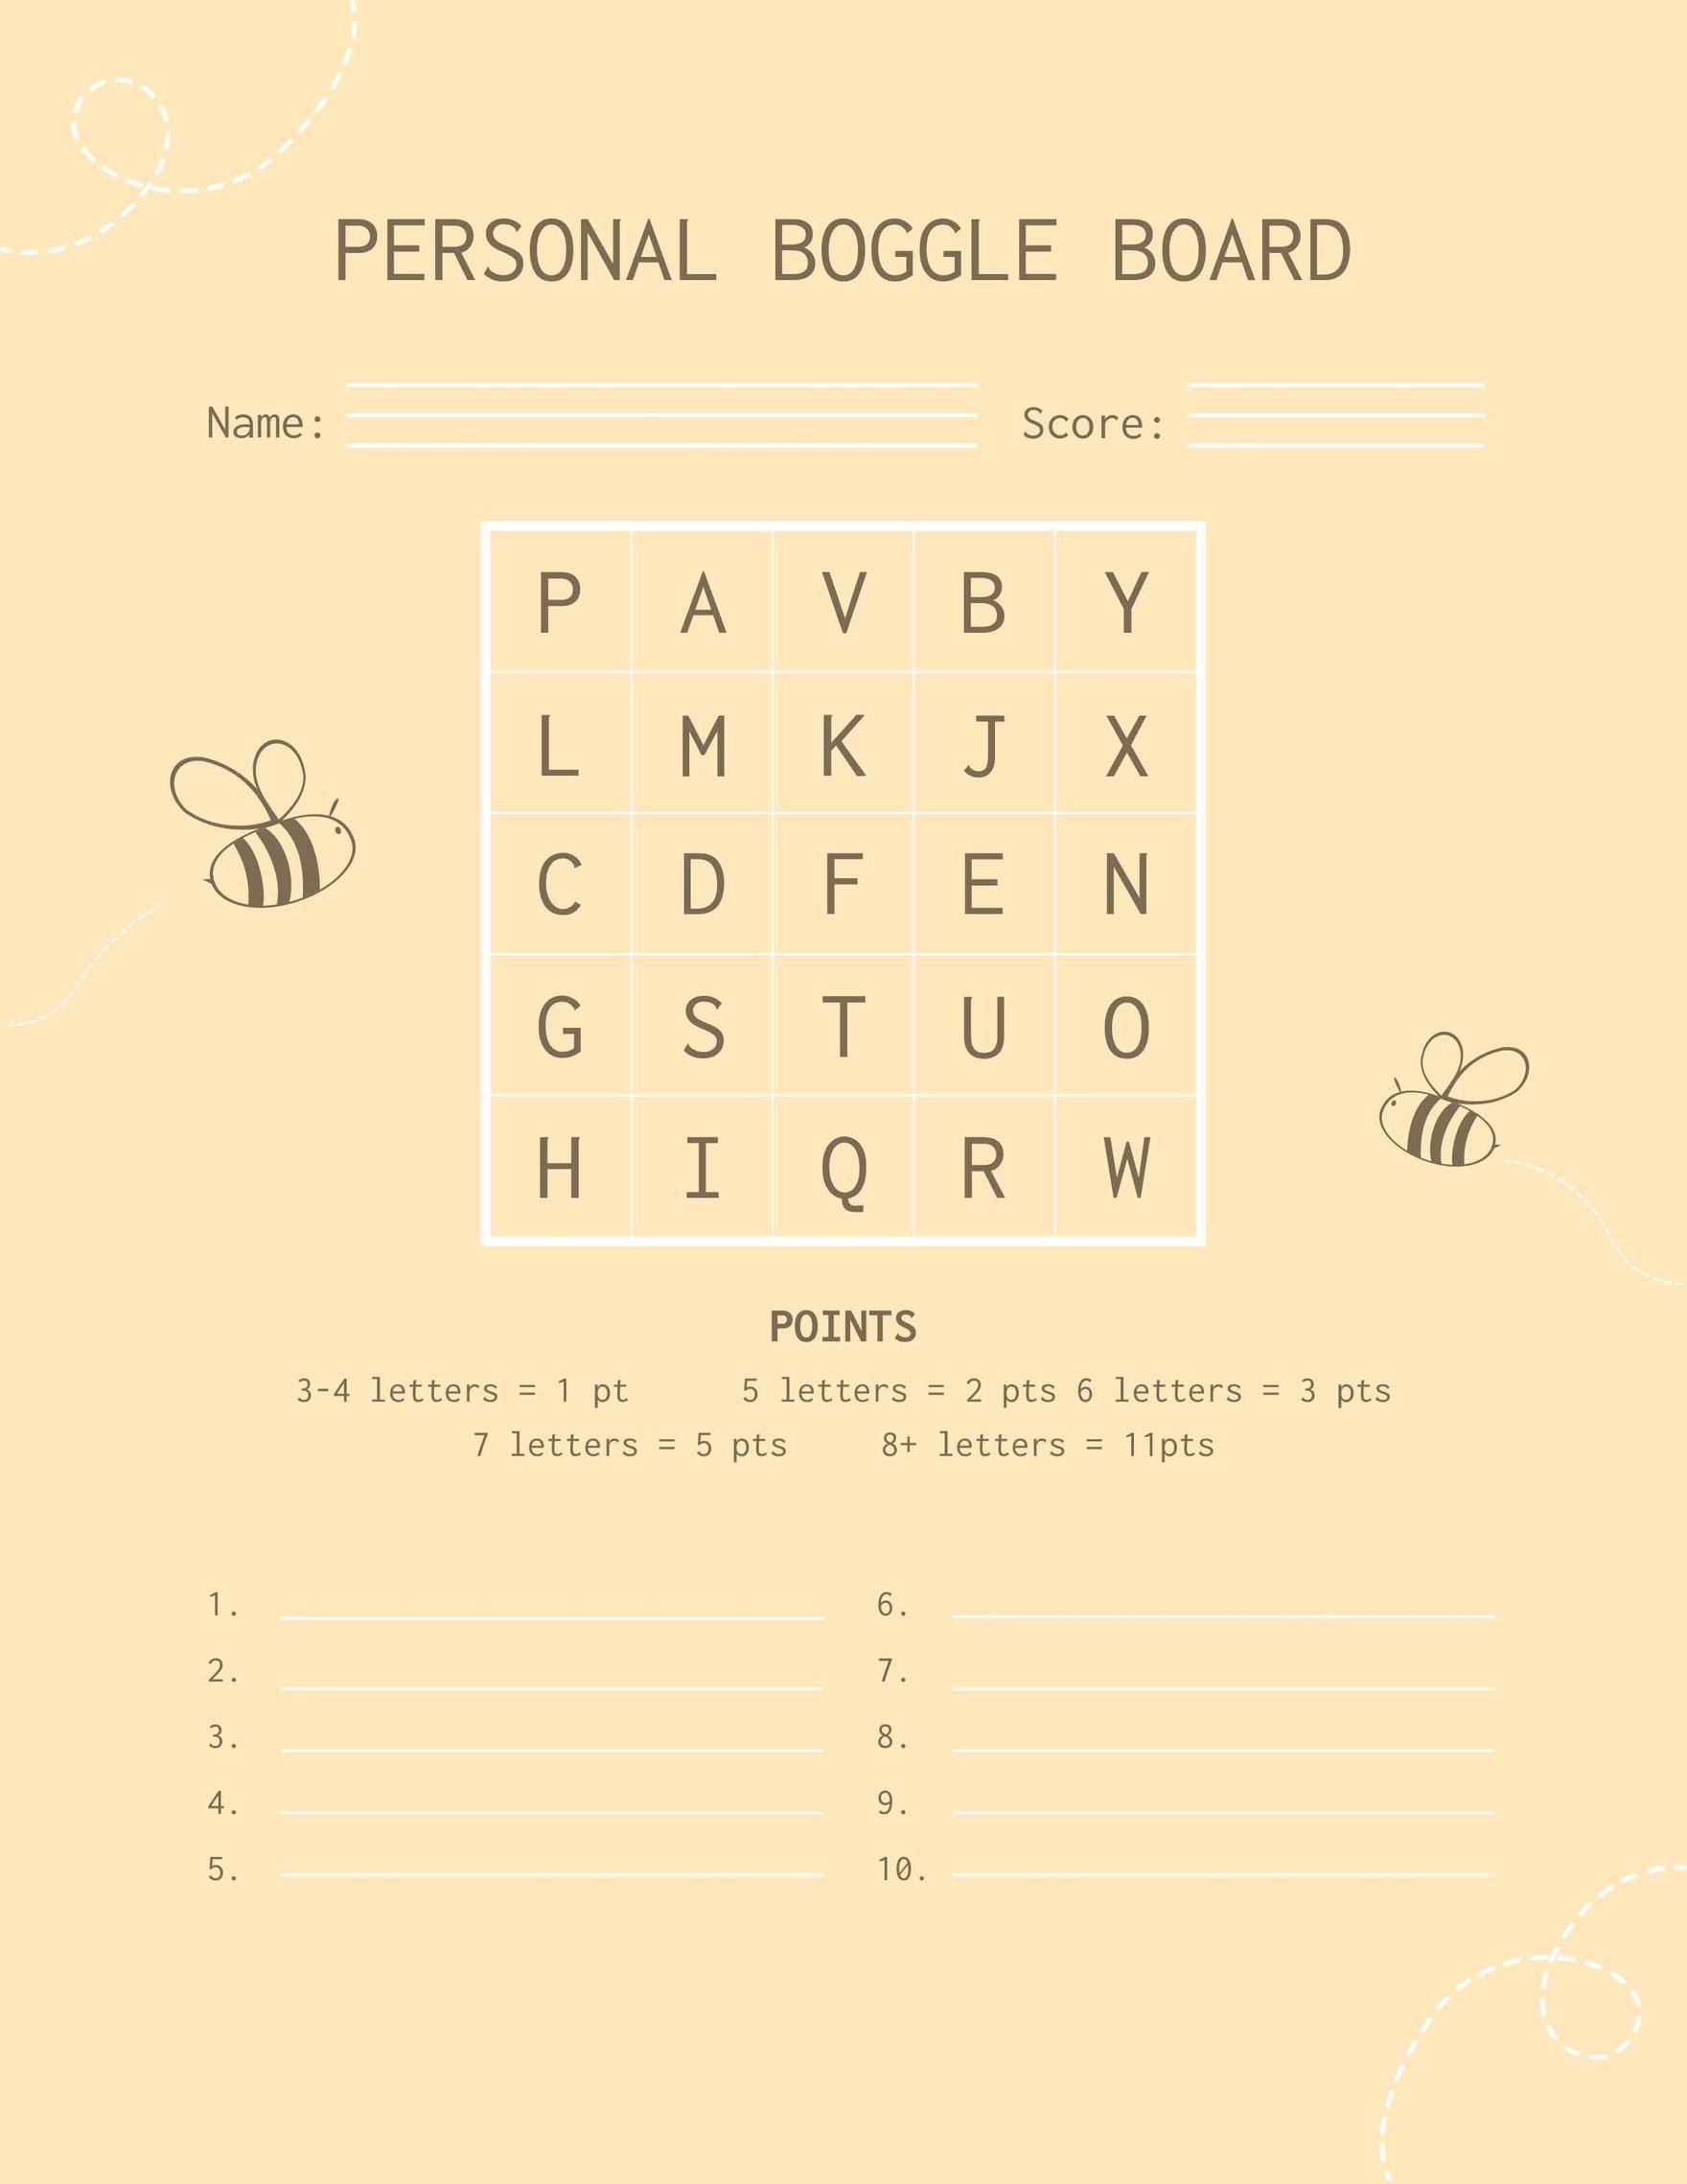 boggle-board-template-in-word-free-download-template